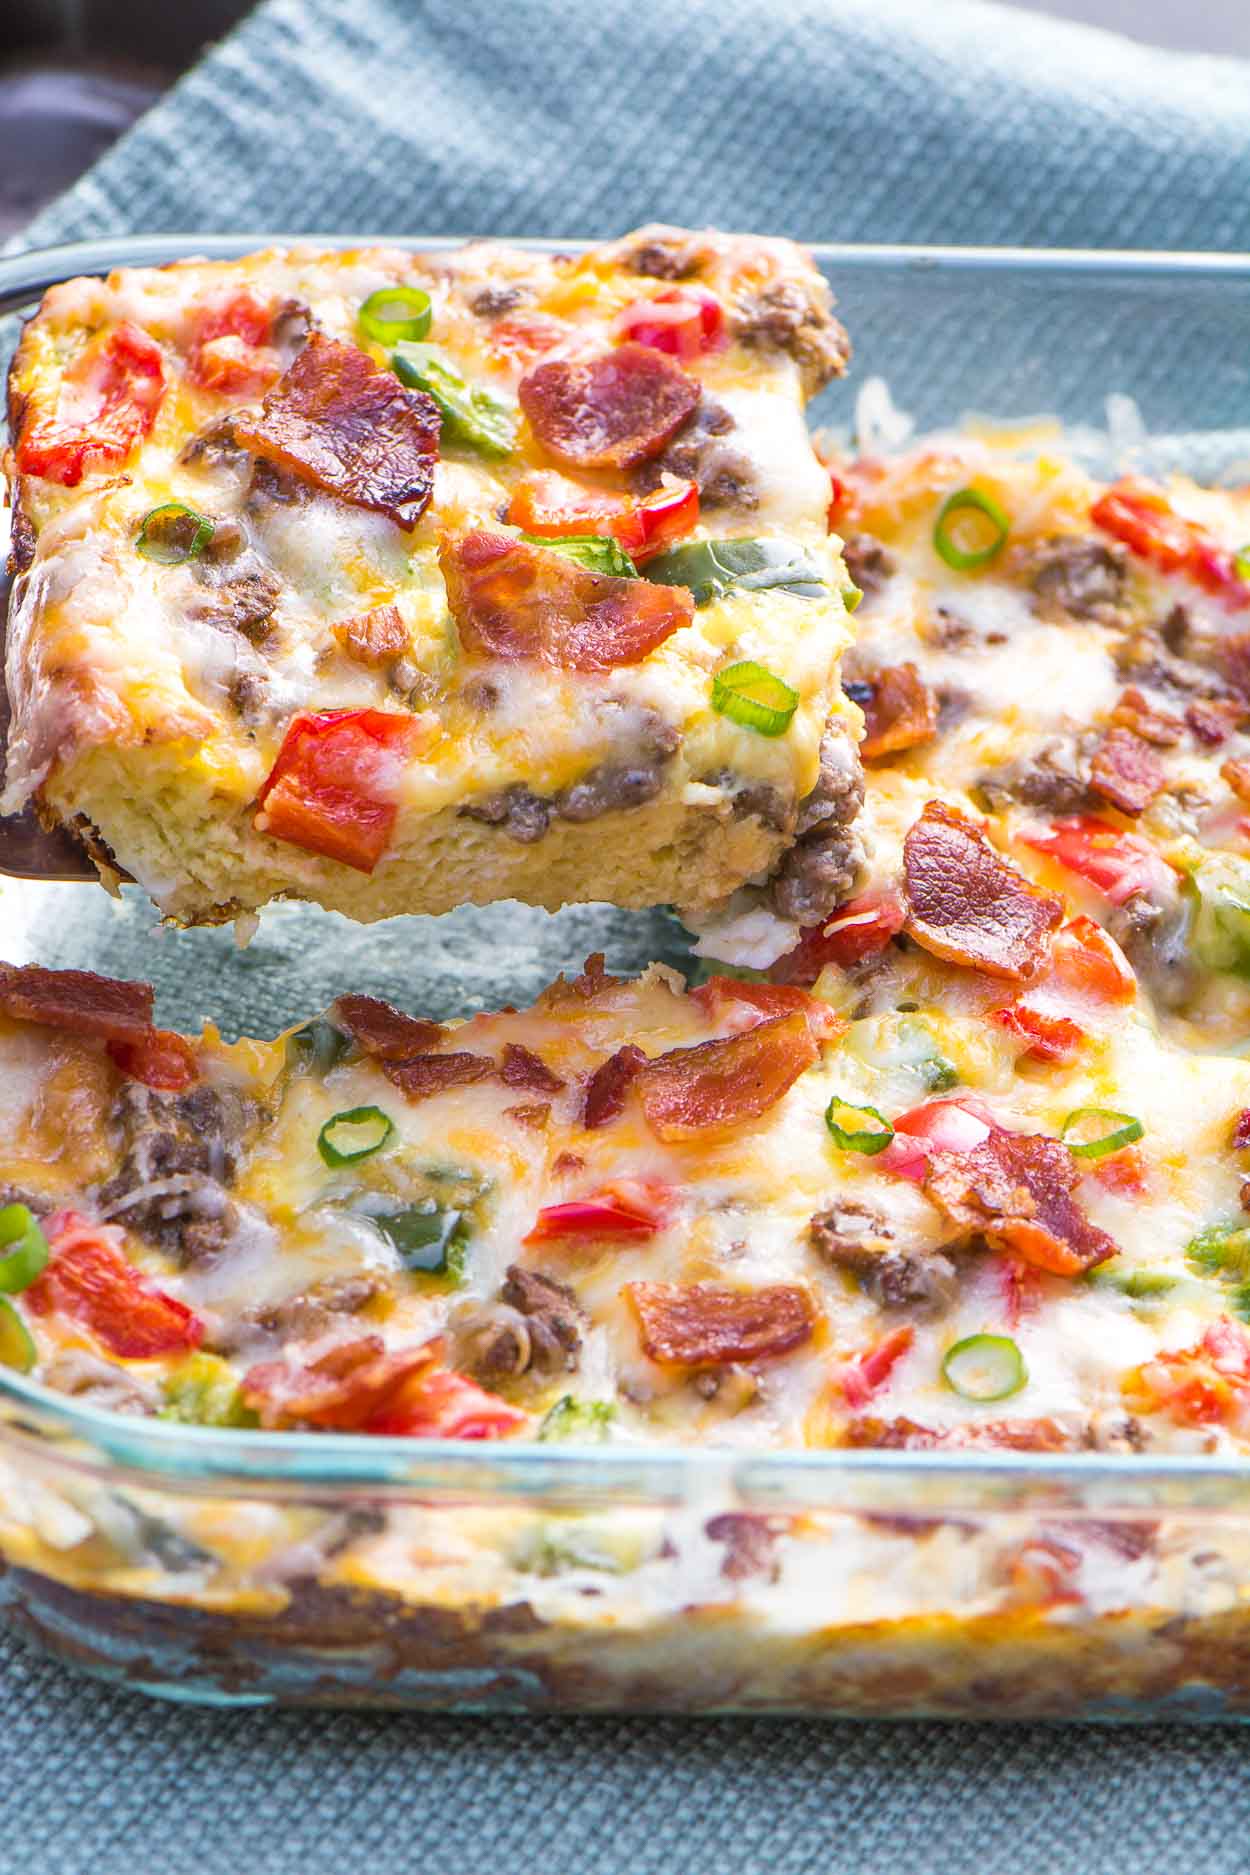 A healthy, fully loaded breakfast casserole topped with fresh veggies, meats and blends of cheeses. Breakfast is served! www.simplerevisions.com